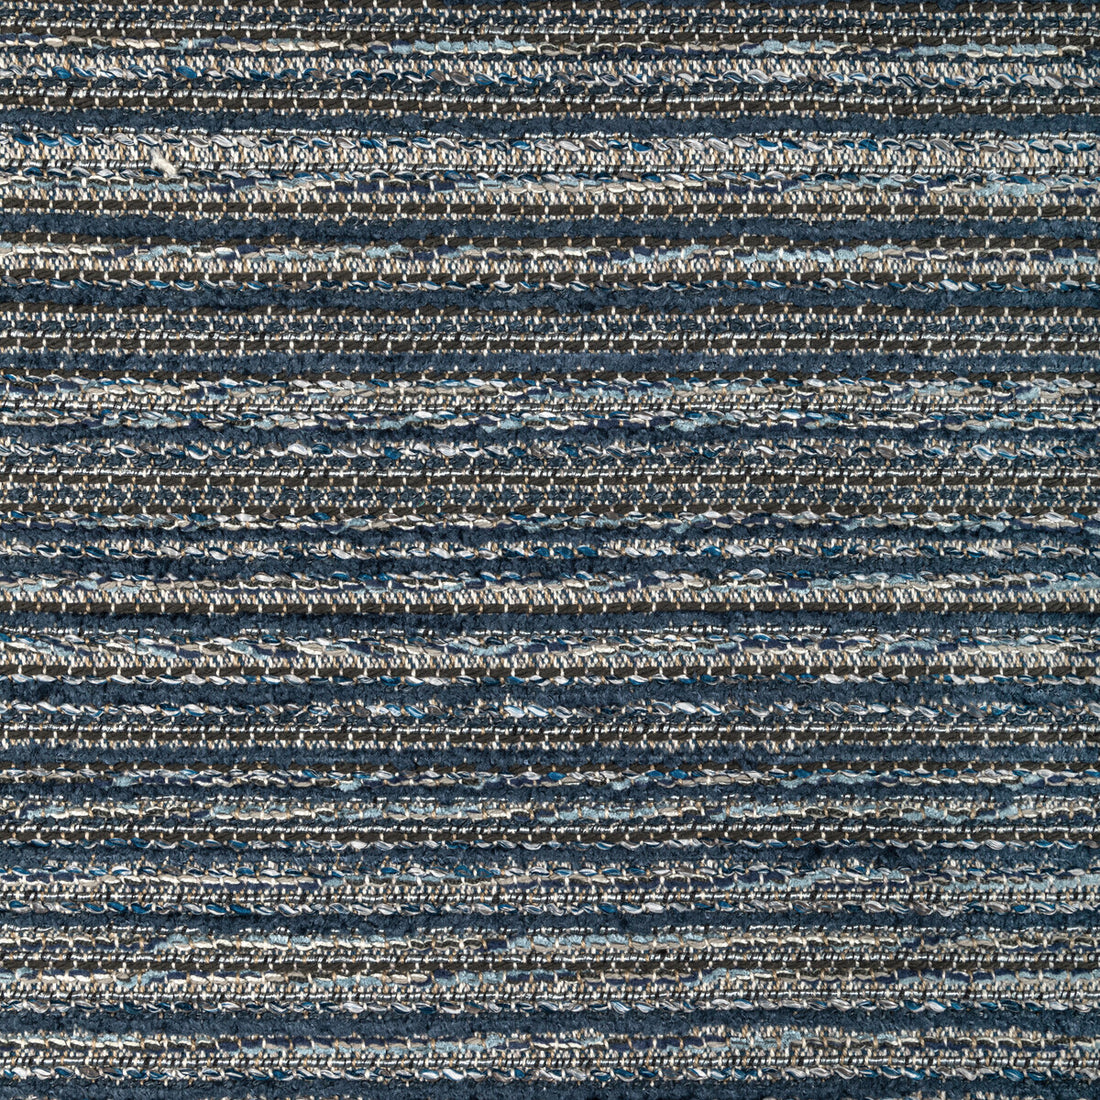 Kravet Design fabric in 36416-50 color - pattern 36416.50.0 - by Kravet Design in the Performance Crypton Home collection